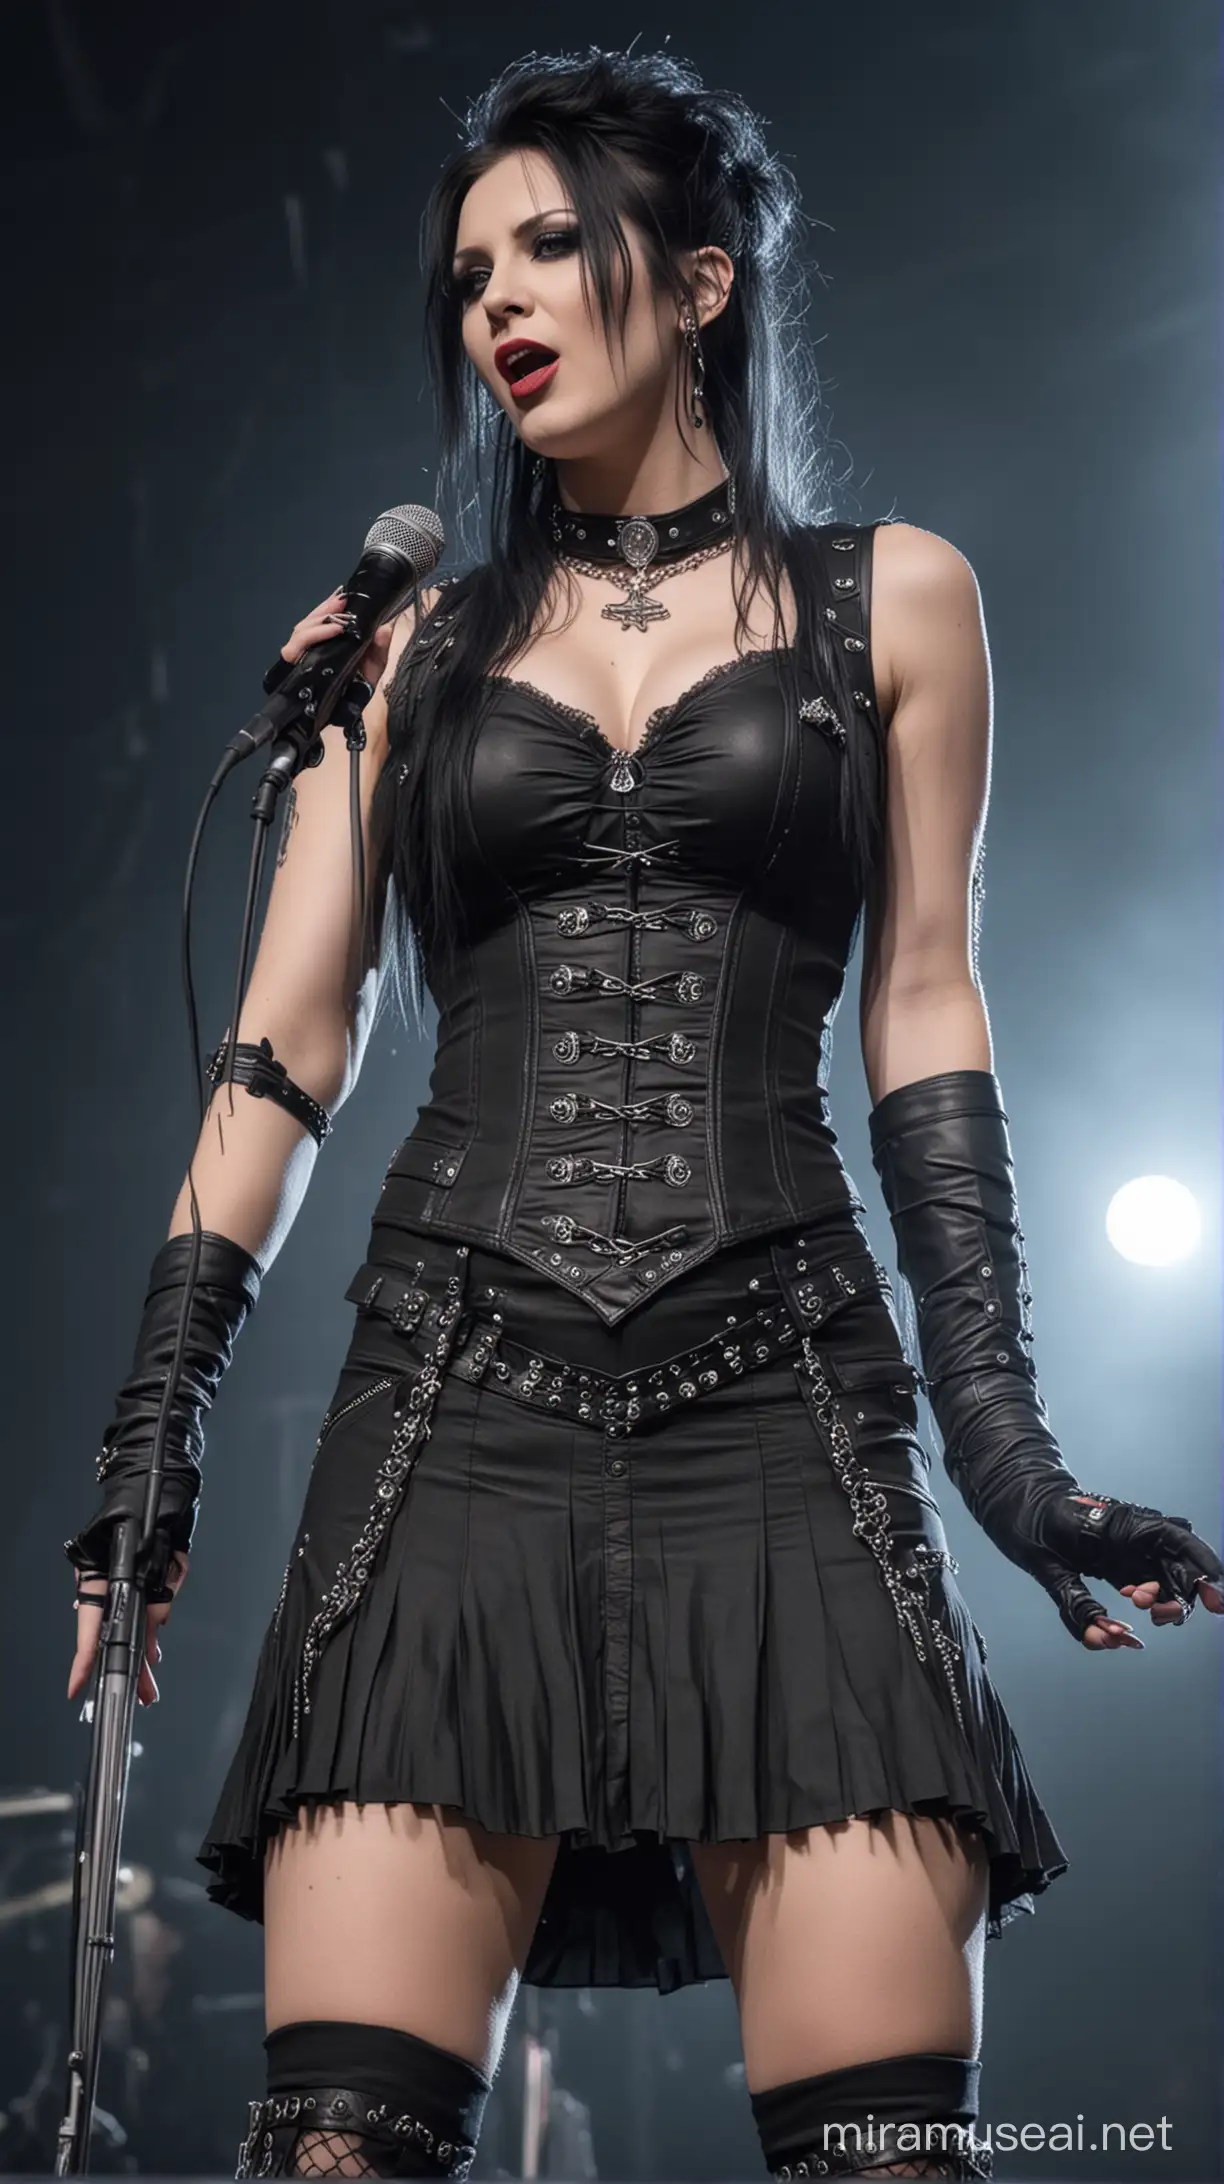 Gothic Lady Rocker Performing On Stage with Captivating Beauty and Charismatic Presence